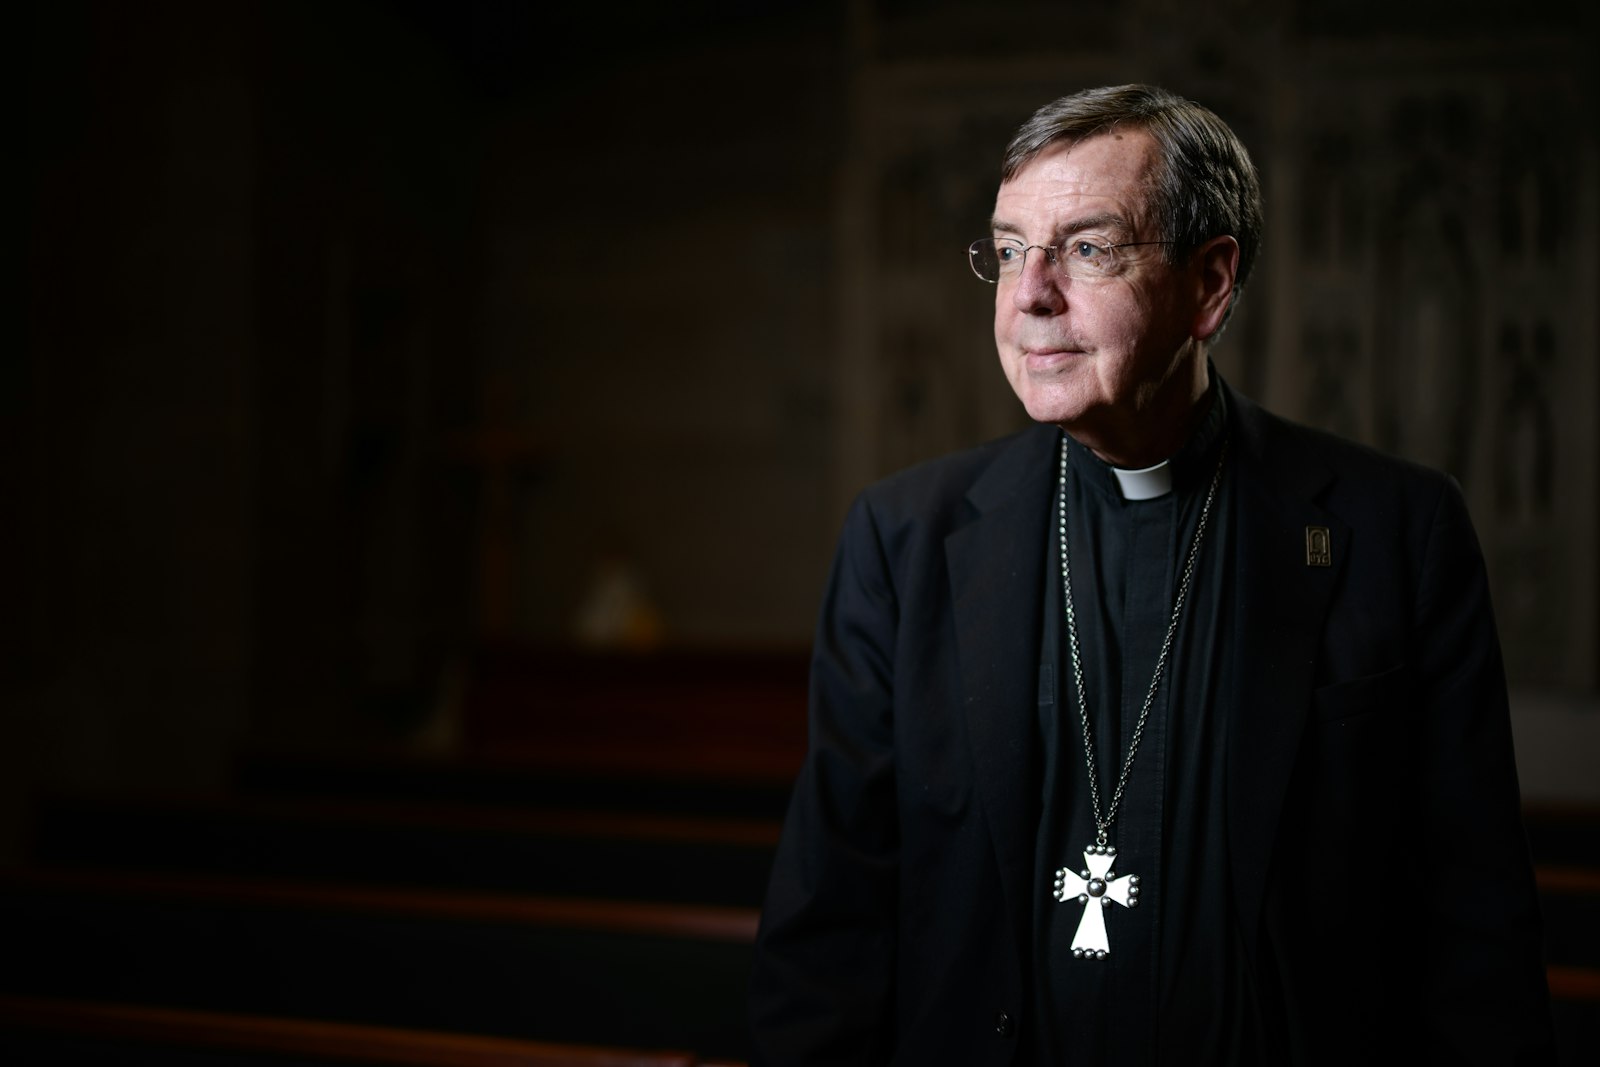 As required by canon law of all bishops upon reaching the age of 75, Archbishop Vigneron will submit a letter of resignation to the Holy Father on Oct. 21, but Detroit's chief shepherd says he's eager to continue the work begun during Synod 16 for as long as Pope Francis "judges good for the life of the diocese." (Marek Dziekonski | Special to Detroit Catholic)